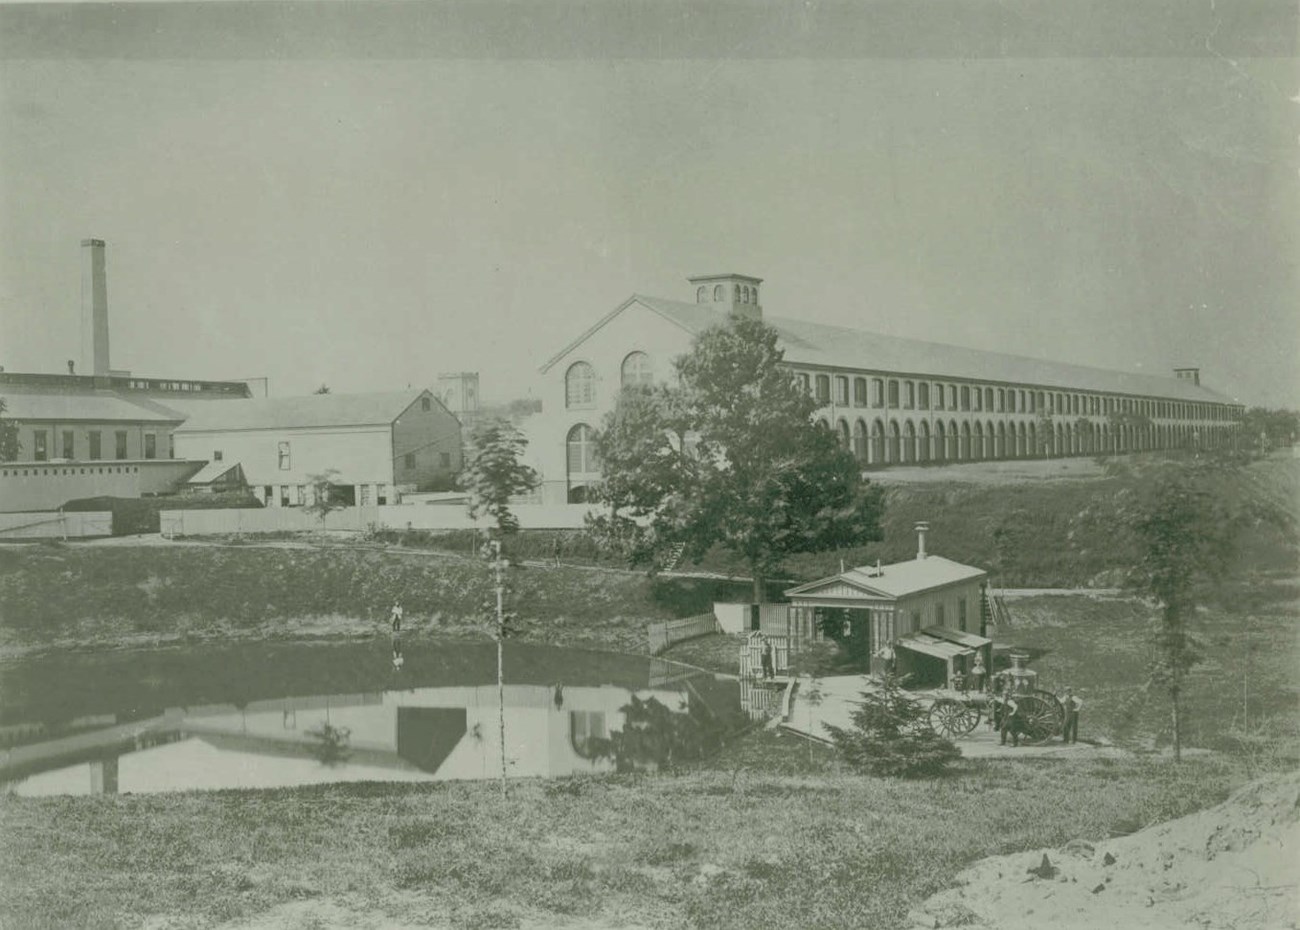 A black and white photo of a long storehouse building with a fire station and pond in the foreground.